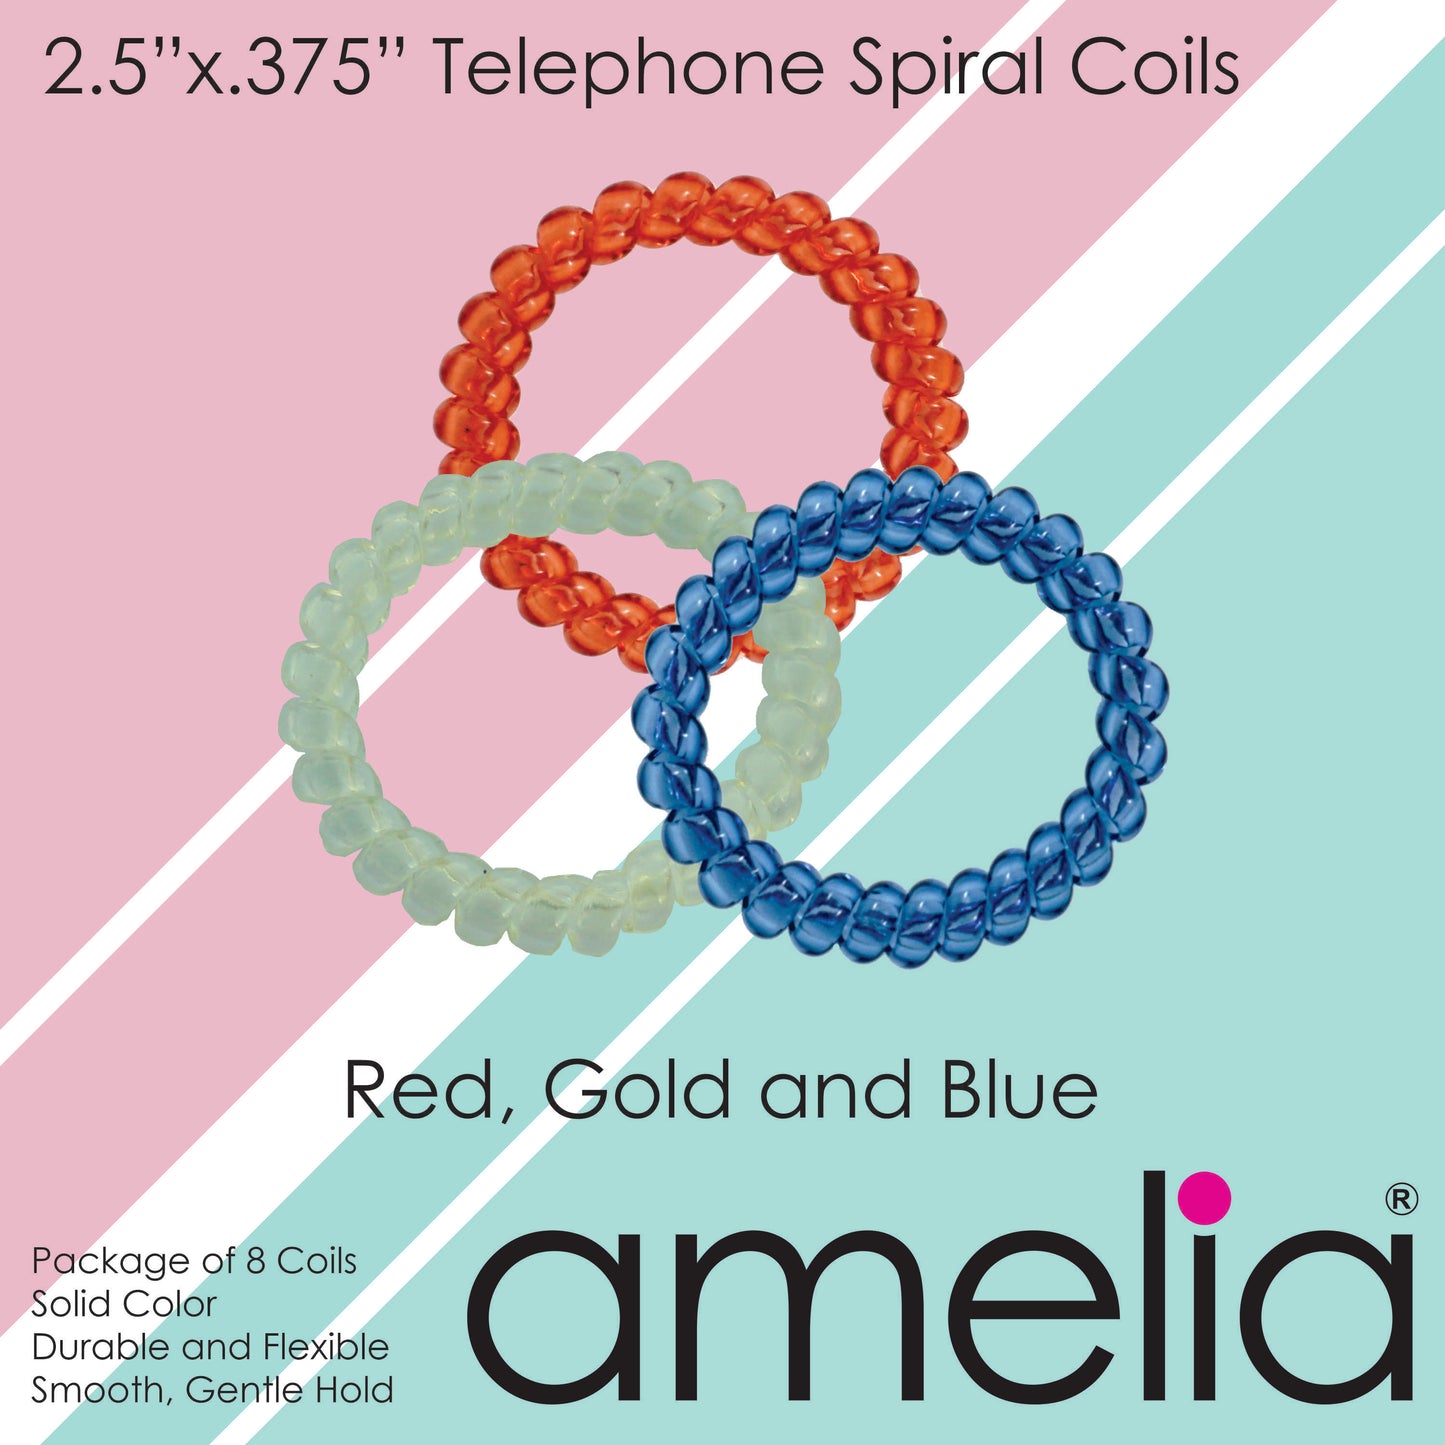 Amelia Beauty Products 8 Large Smooth Elastic Hair Coils, 2. 5in Diameter Thick Spiral Hair Ties, Gentle on Hair, Strong Hold and Minimizes Dents and Creases, Red, Gold and Blue